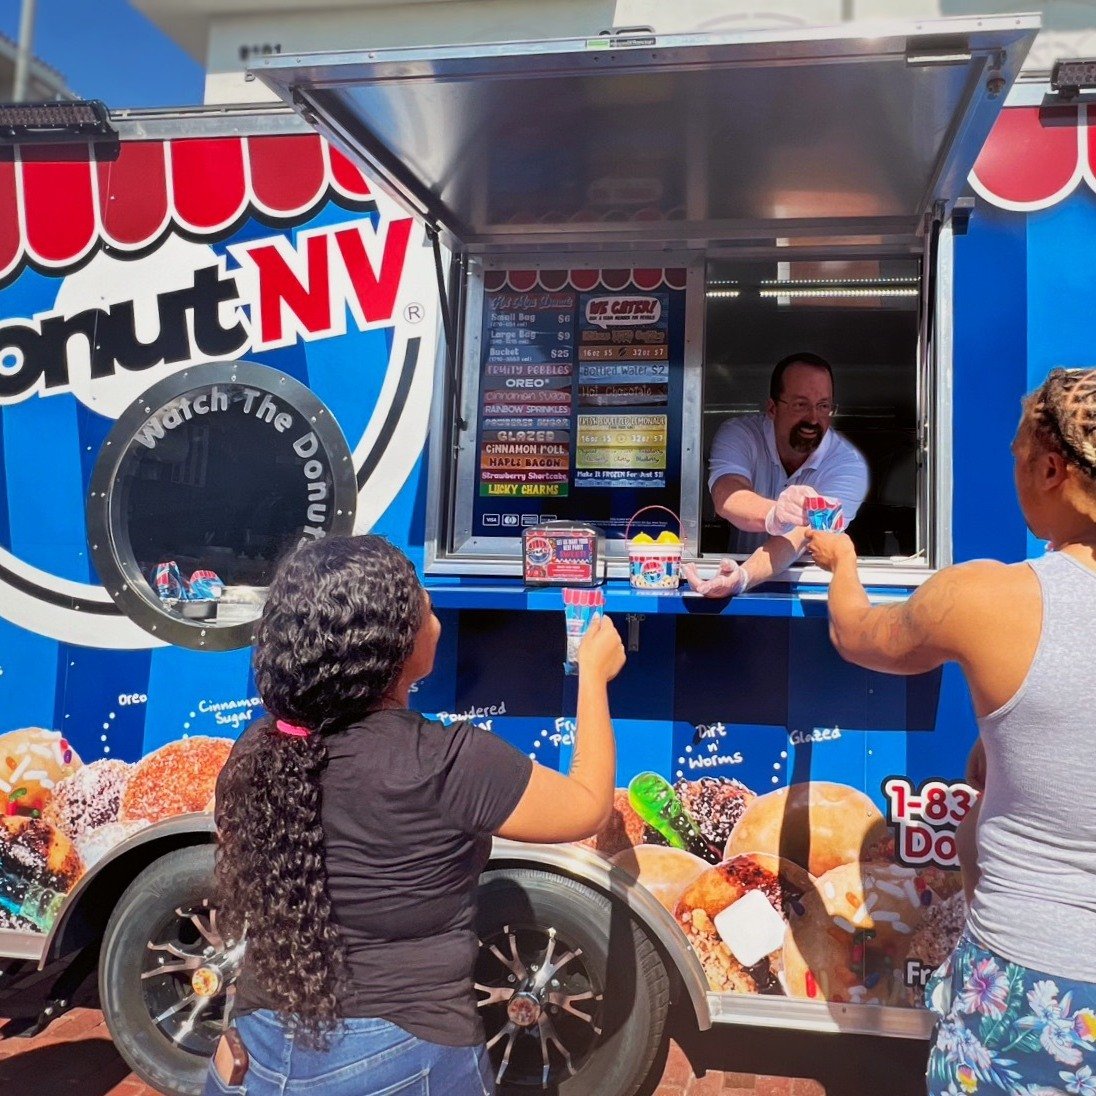 This month&rsquo;s Hometown Highlight features DonutNV Piedmont Triad, North Carolina!
 
~ About DonutNV ~
Step right up and watch the donuts! DonutNV is an interactive mobile donut trailer where they bring the party to your door!
At Piedmont Triad D